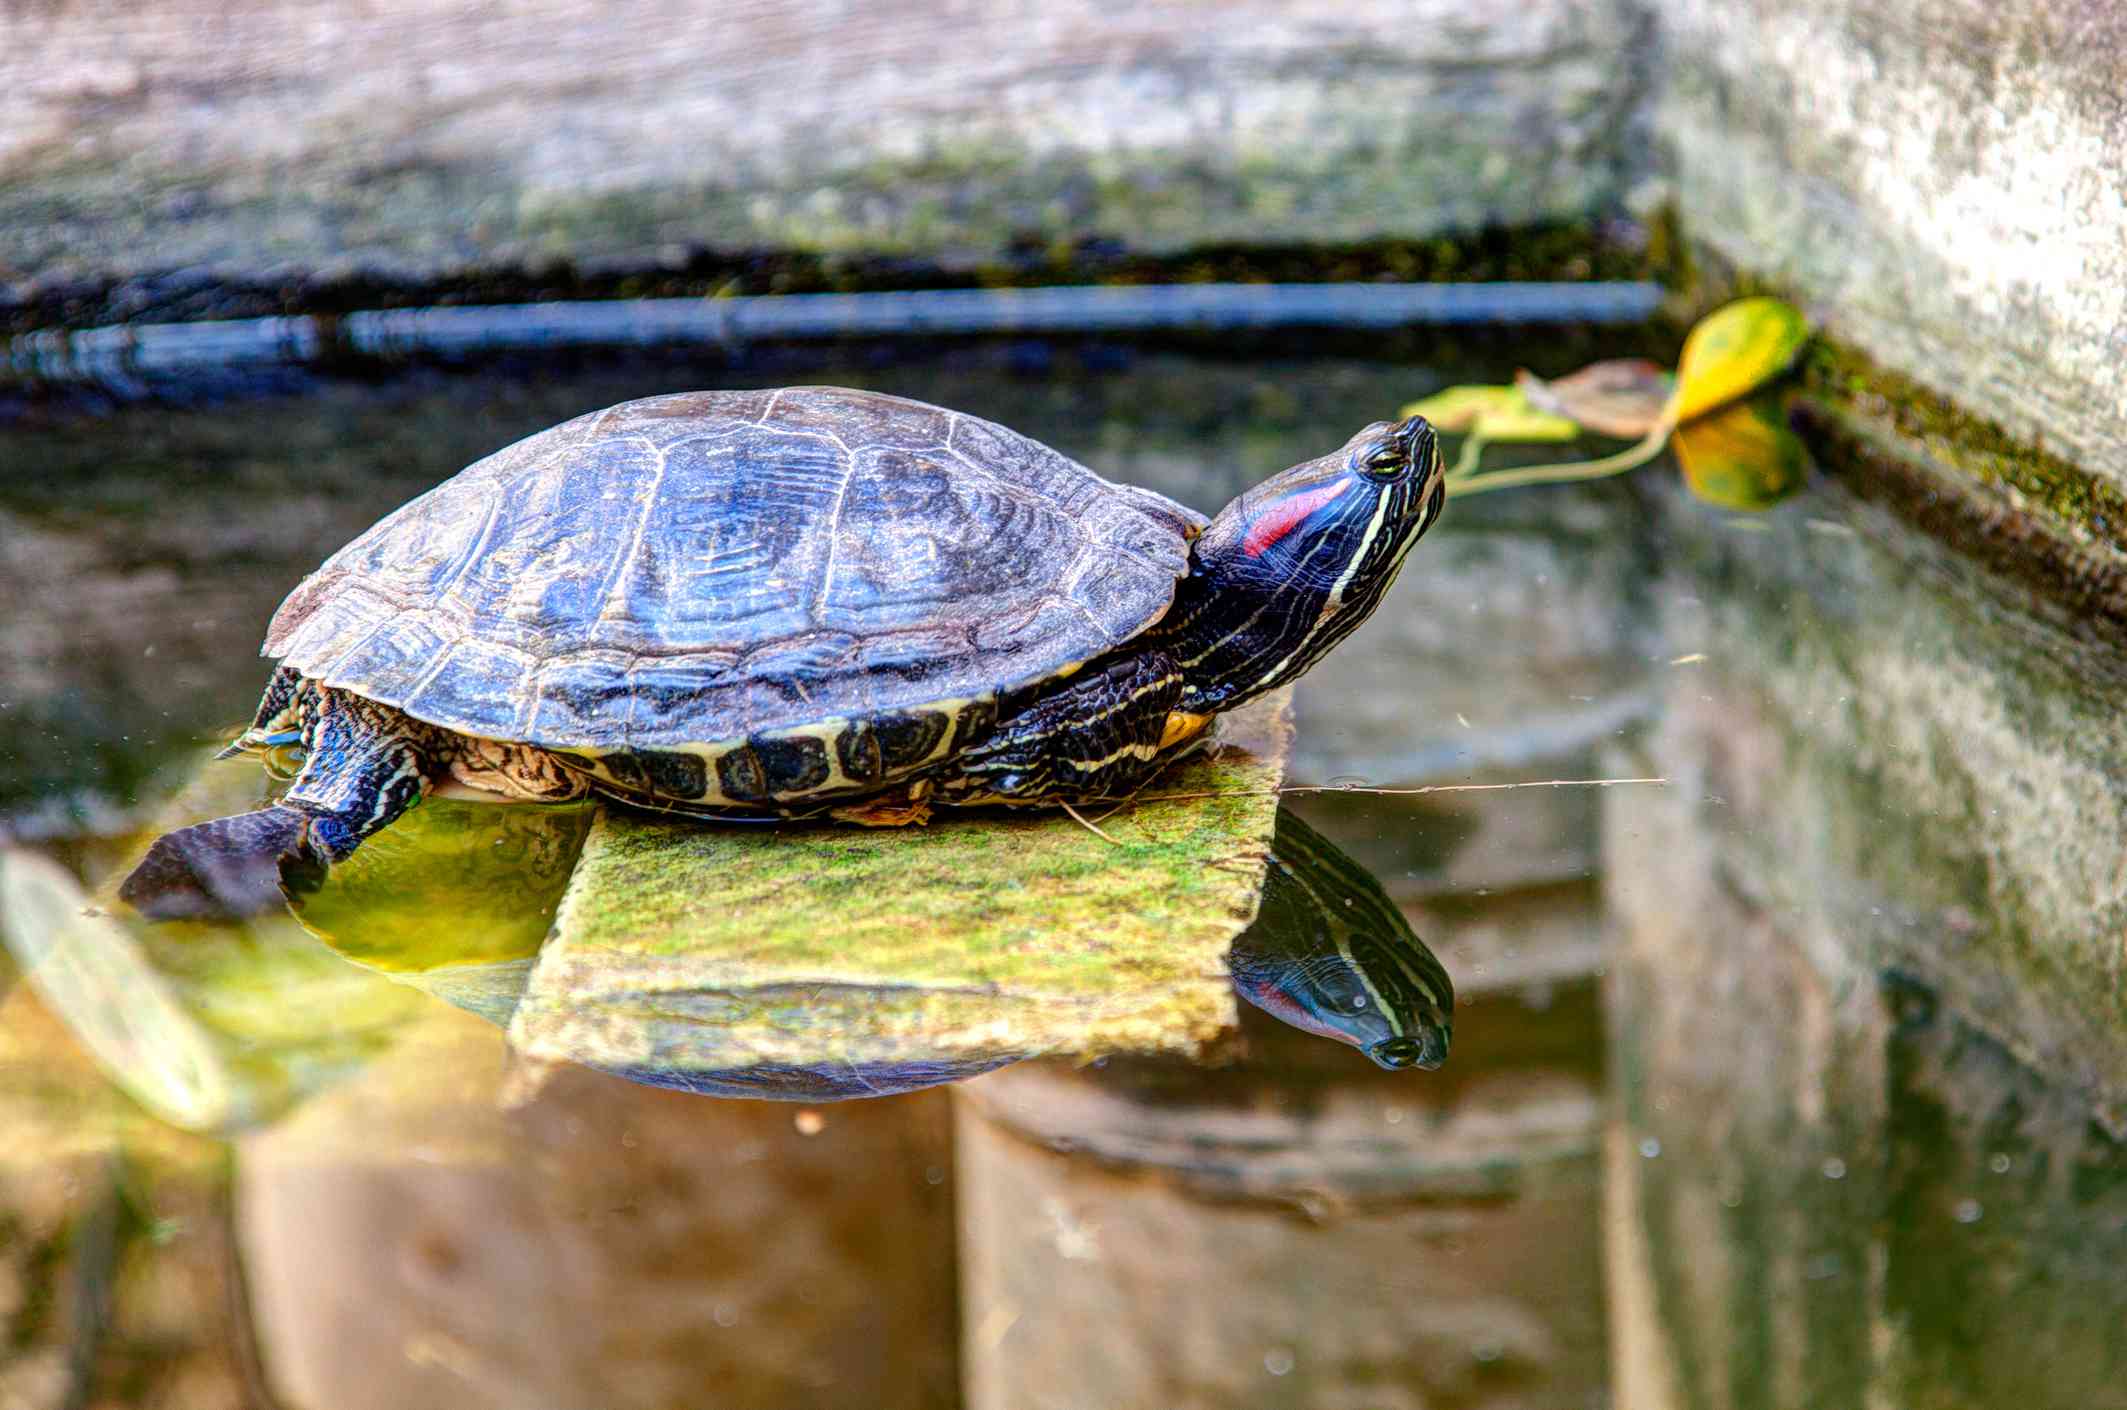 Red Eared Slider Turtle Basking on a stone